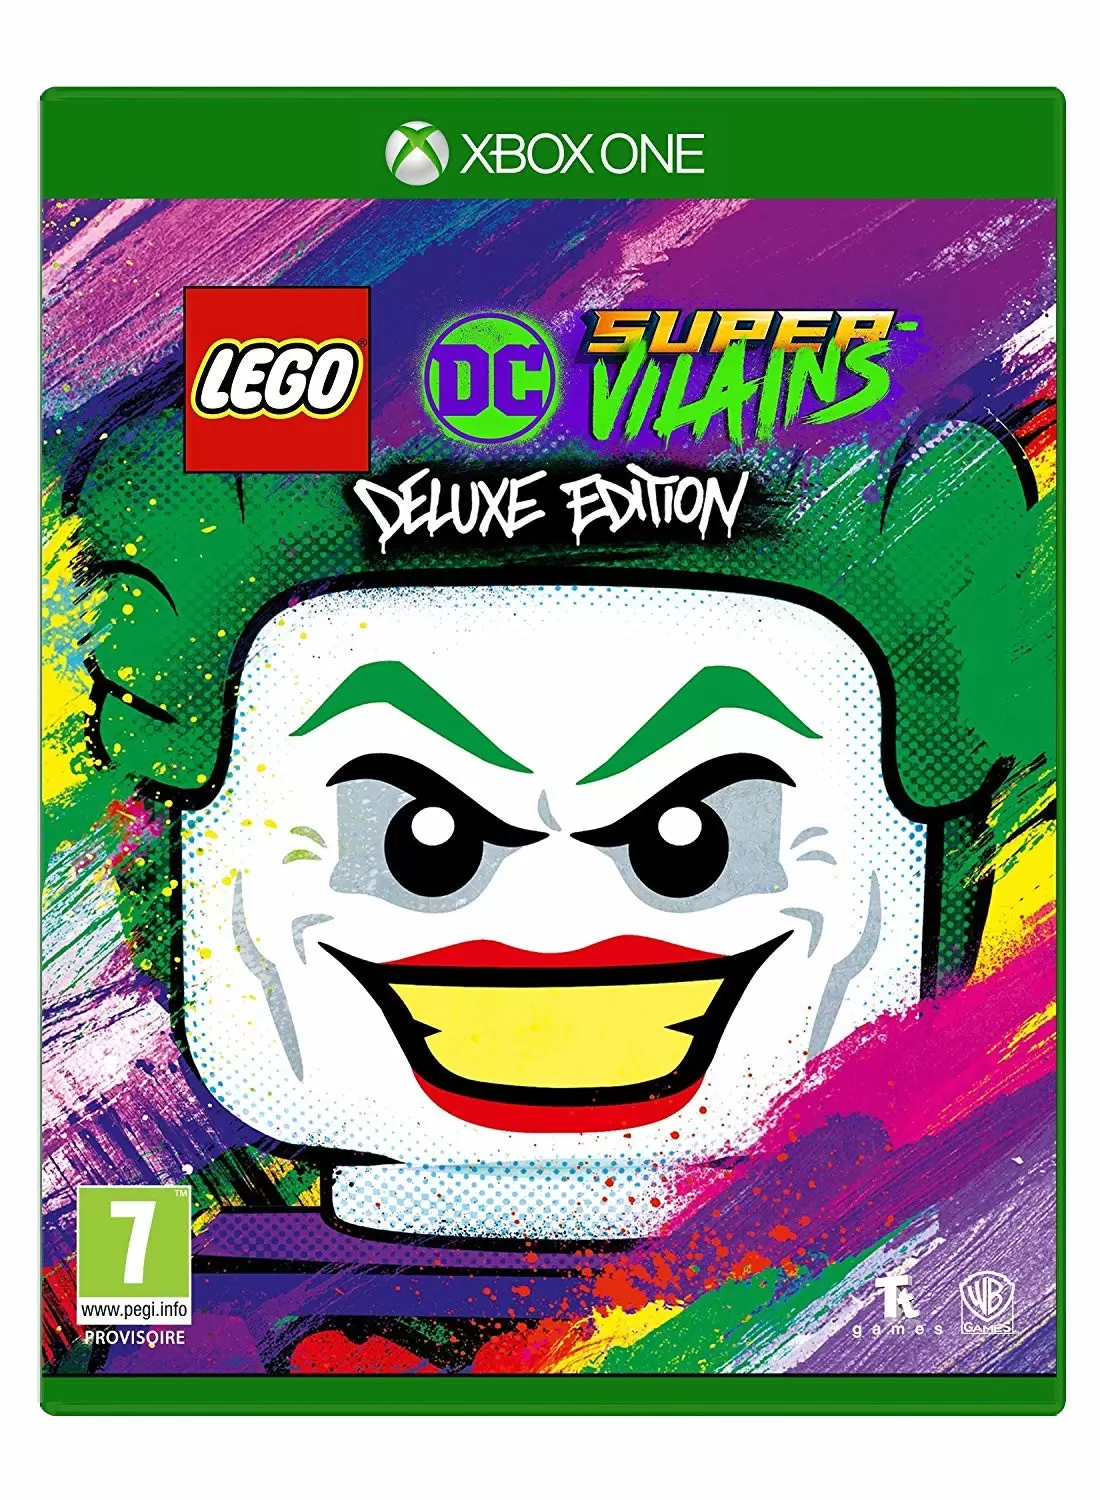 XBOX One Games - Lego Dc Super Vilains Deluxe Edition